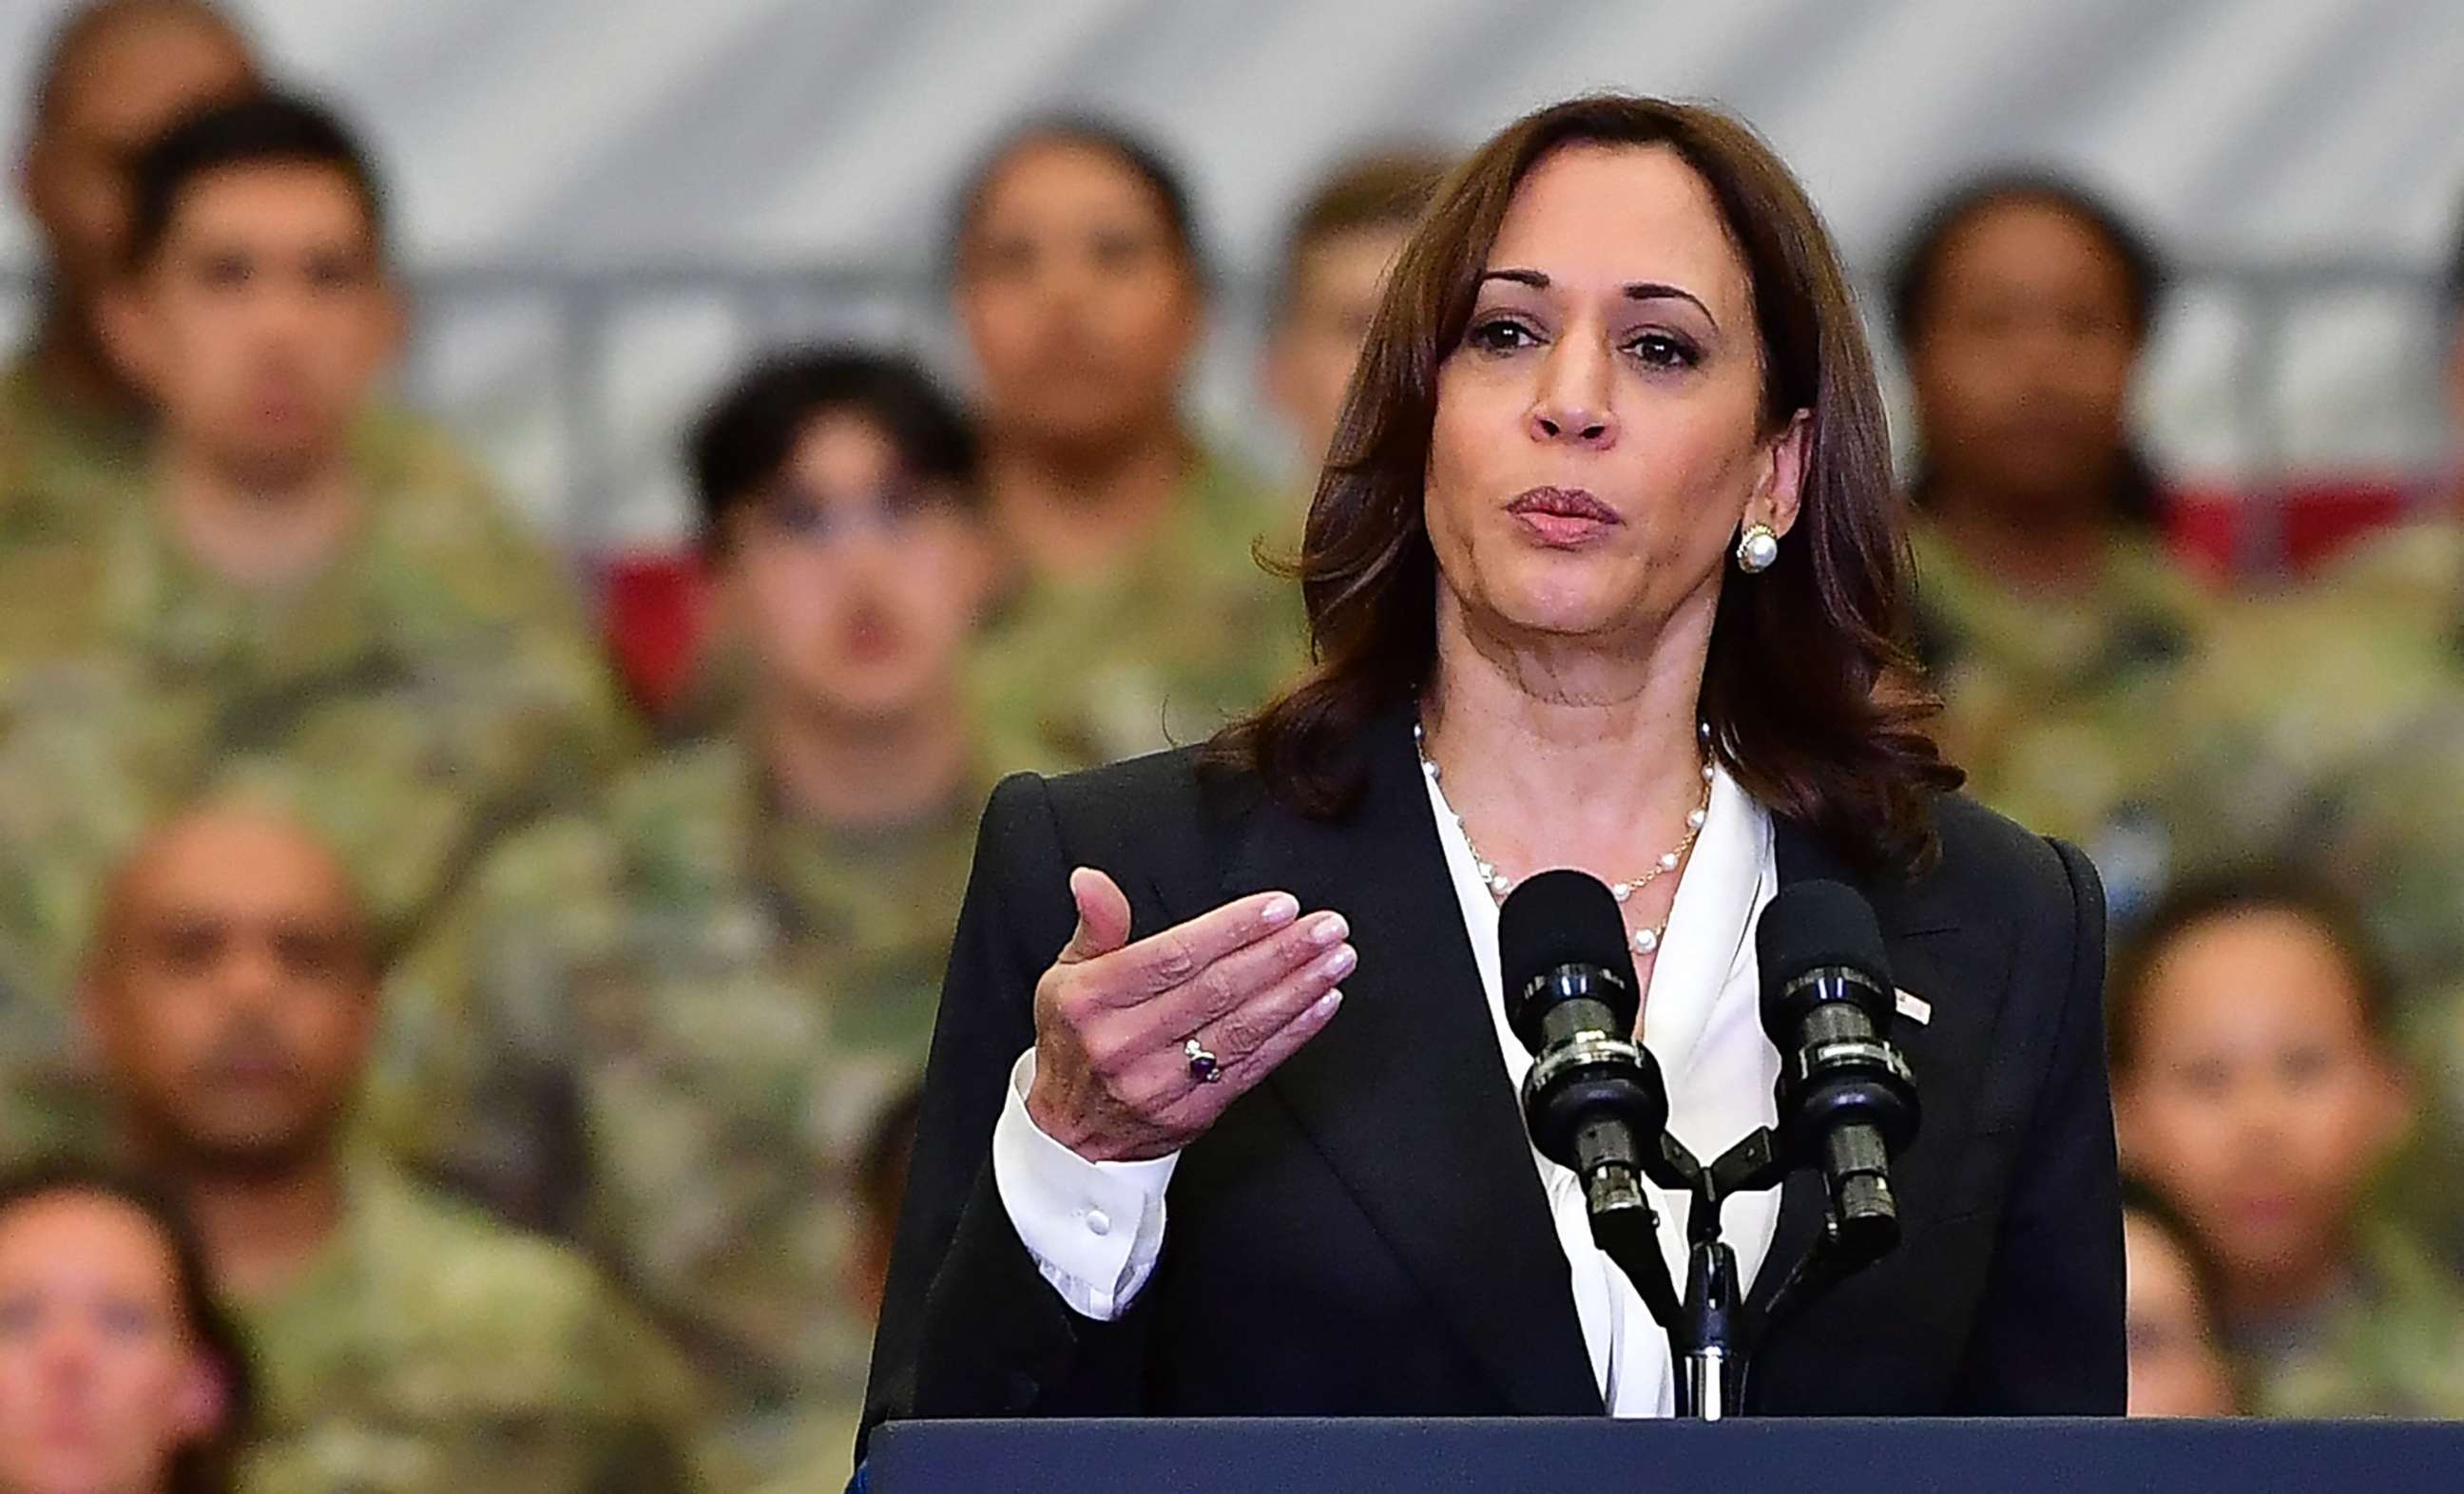 PHOTO: US Vice President Kamala Harris speaks during a visit to Vandenberg space force base in Lompoc, California on April 18, 2022.